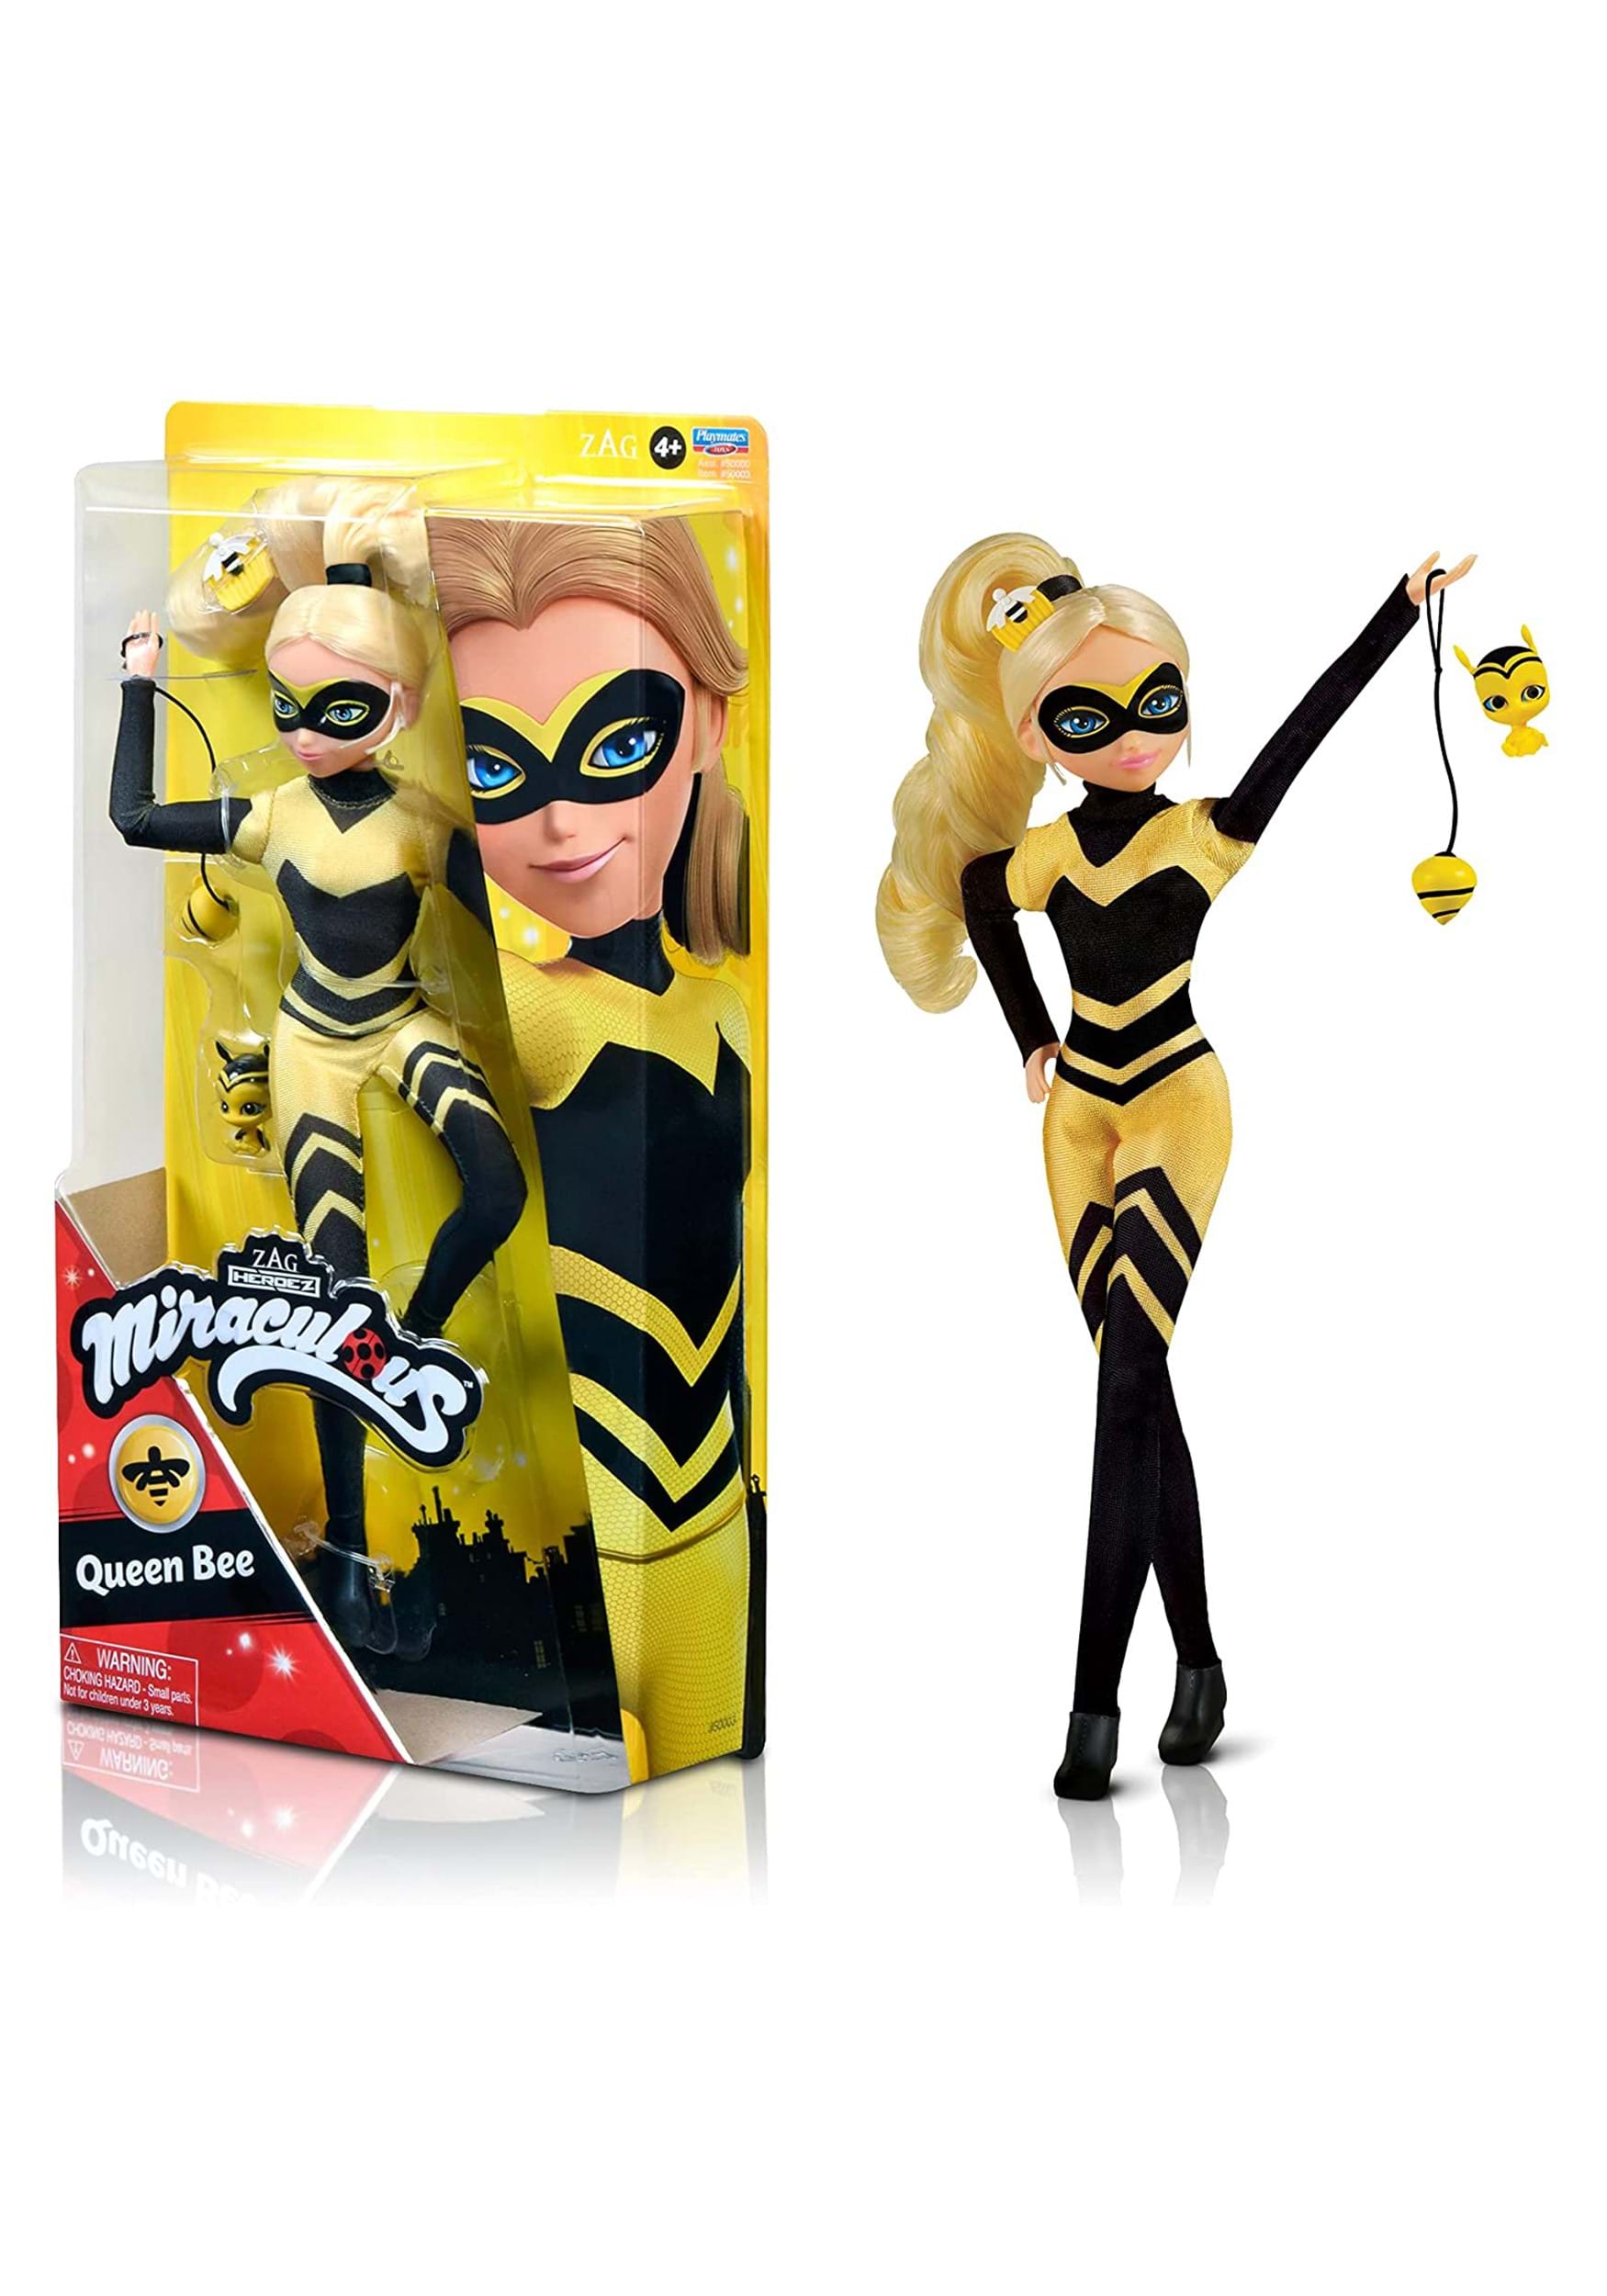 Queen Bee Fashion Doll from Miraculous Ladybug